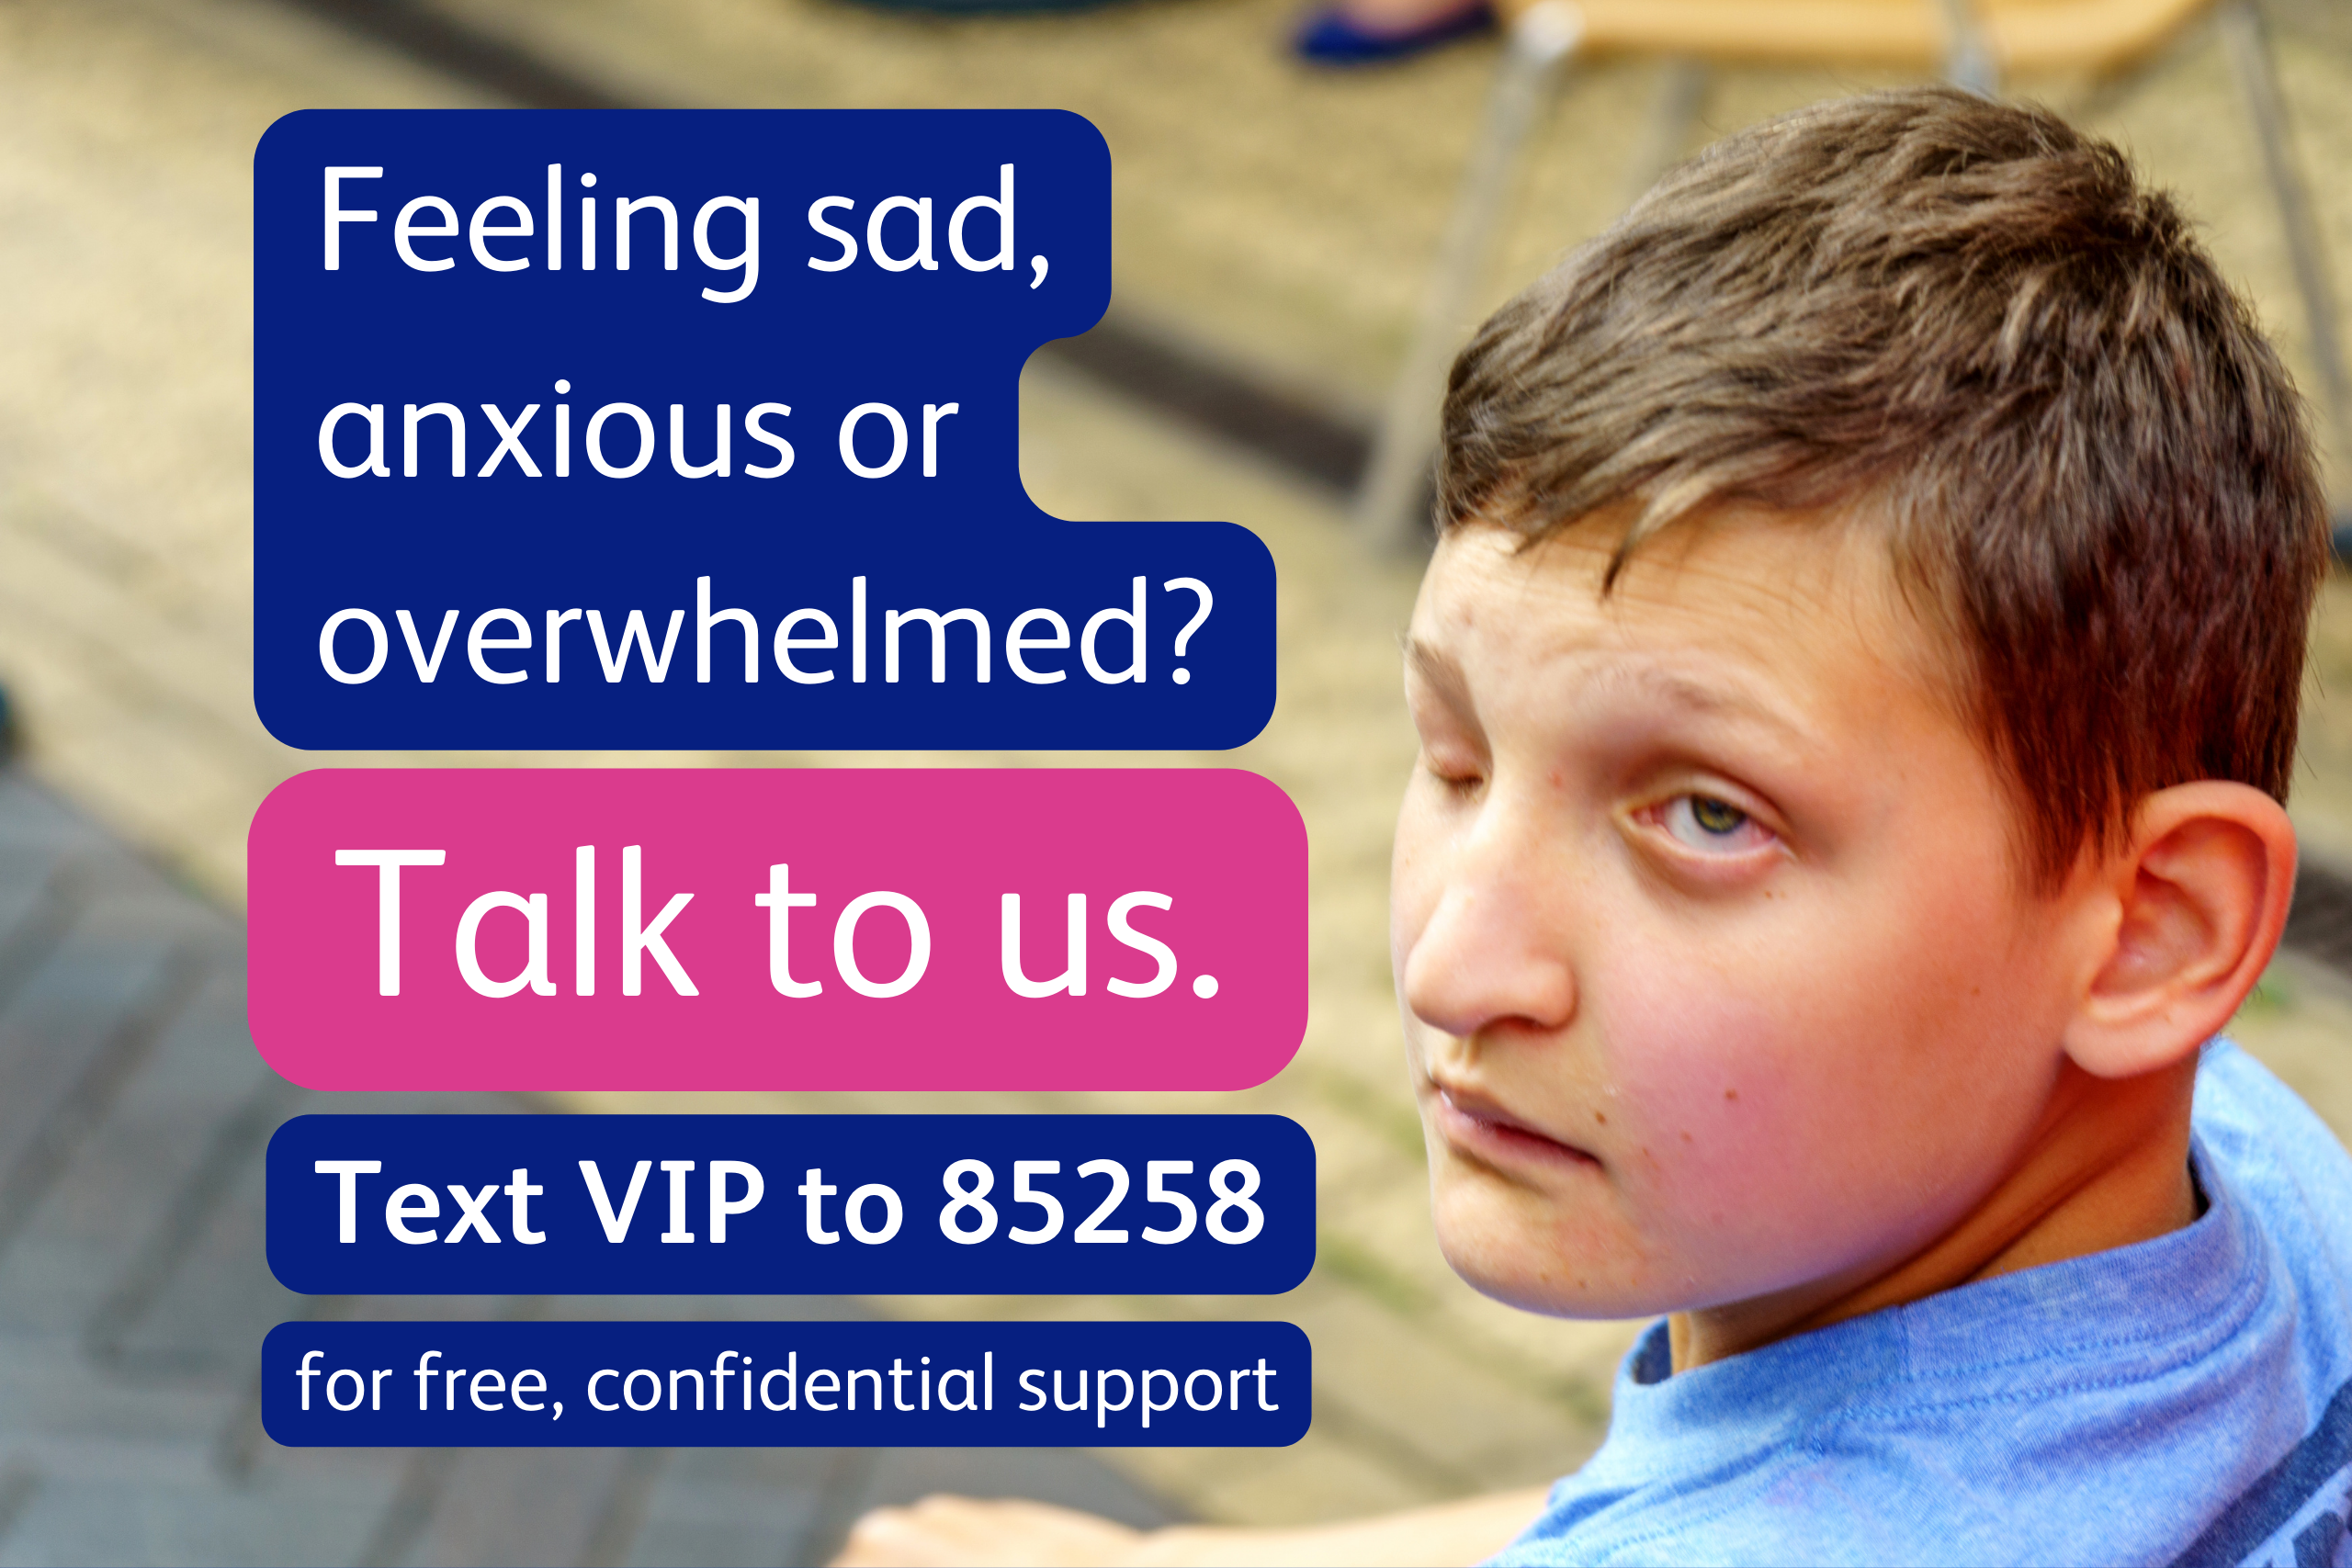 A white, visually impaired teenage boy is sitting and looking over his shoulder, facing towards the camera with a straight-faced expression. He has short, sandy brown hair. Text: “Feeling sad, anxious, or overwhelmed? Talk to us. Text VIP to 85258 for free, confidential support, 24/7.